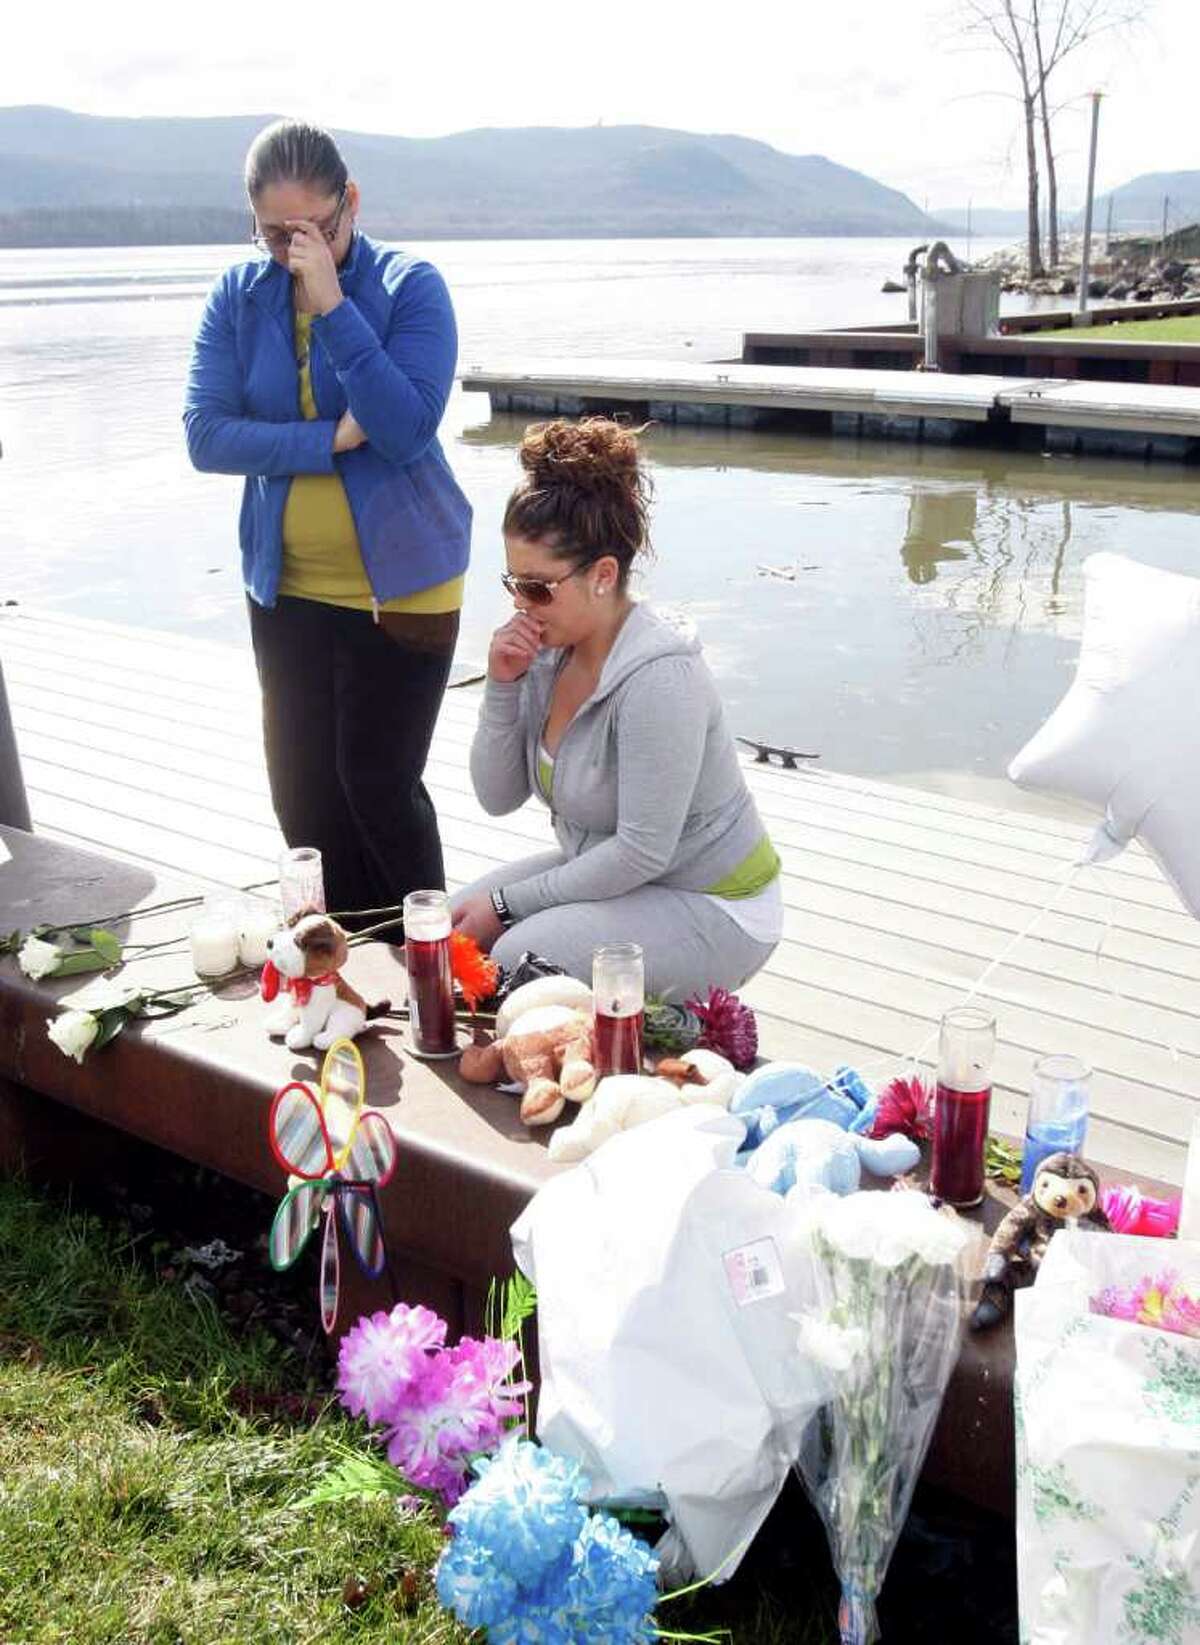 Natasha Colon, left, and Nicole Callahan, both of Newburgh, N.Y., visit a memorial at the boat ramp where Lashanda Armstrong drove her minivan into the Hudson River on Tuesday night killing herself and three of her children, in Newburgh, on Thursday, April 14, 2011.